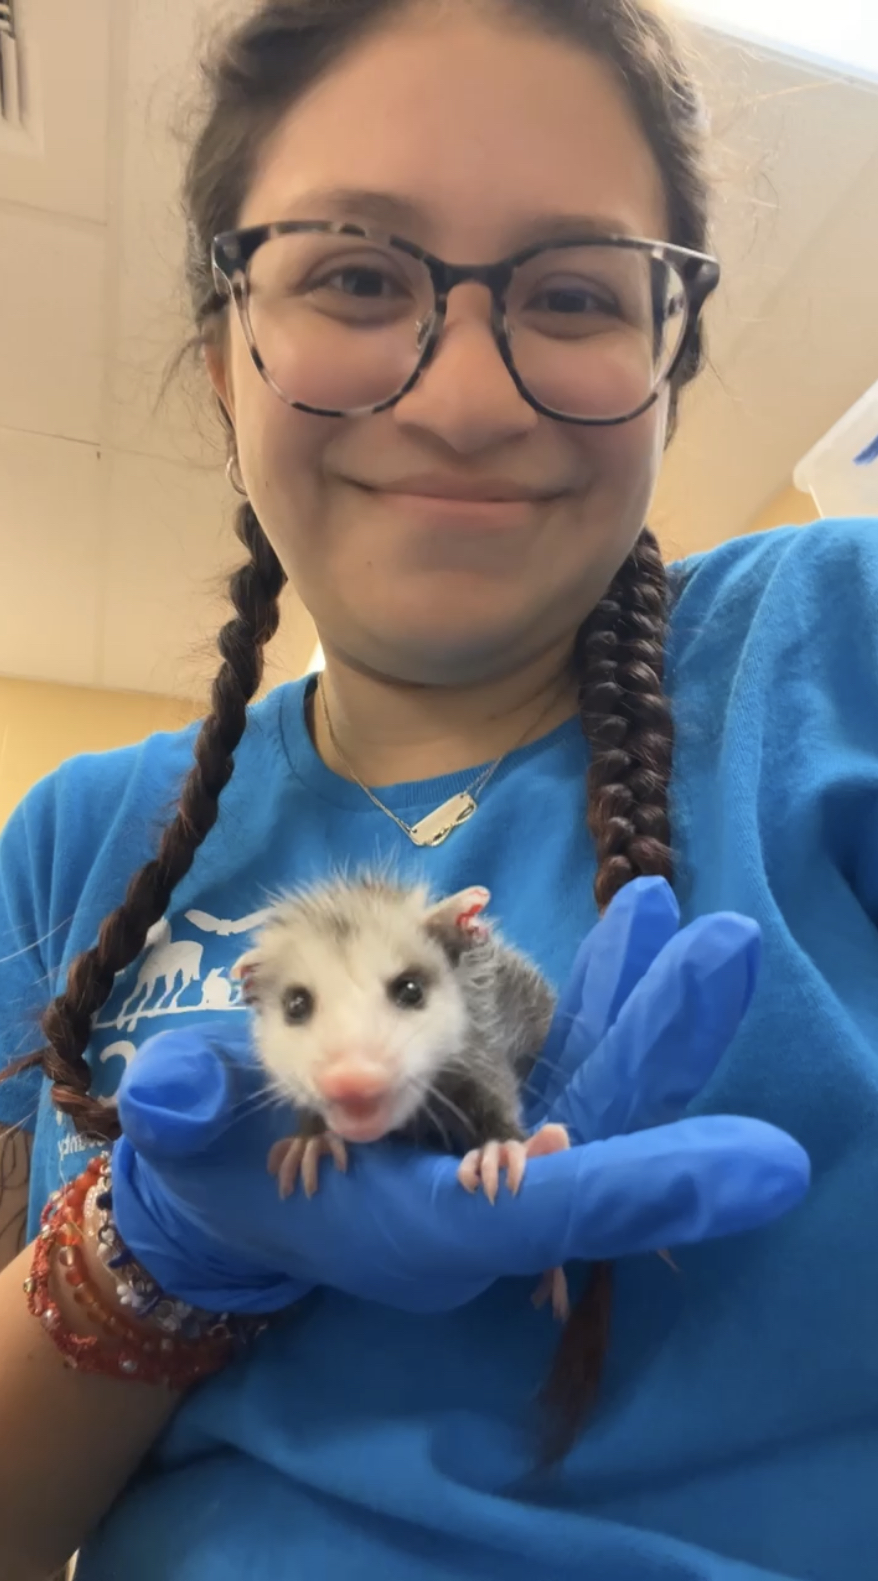 Jocelyn is smiling and taking a selfie with one hand. The other hand (gloved) is holding a baby possum. Danielle is wearing a blue shirt with a white SPCA logo on it